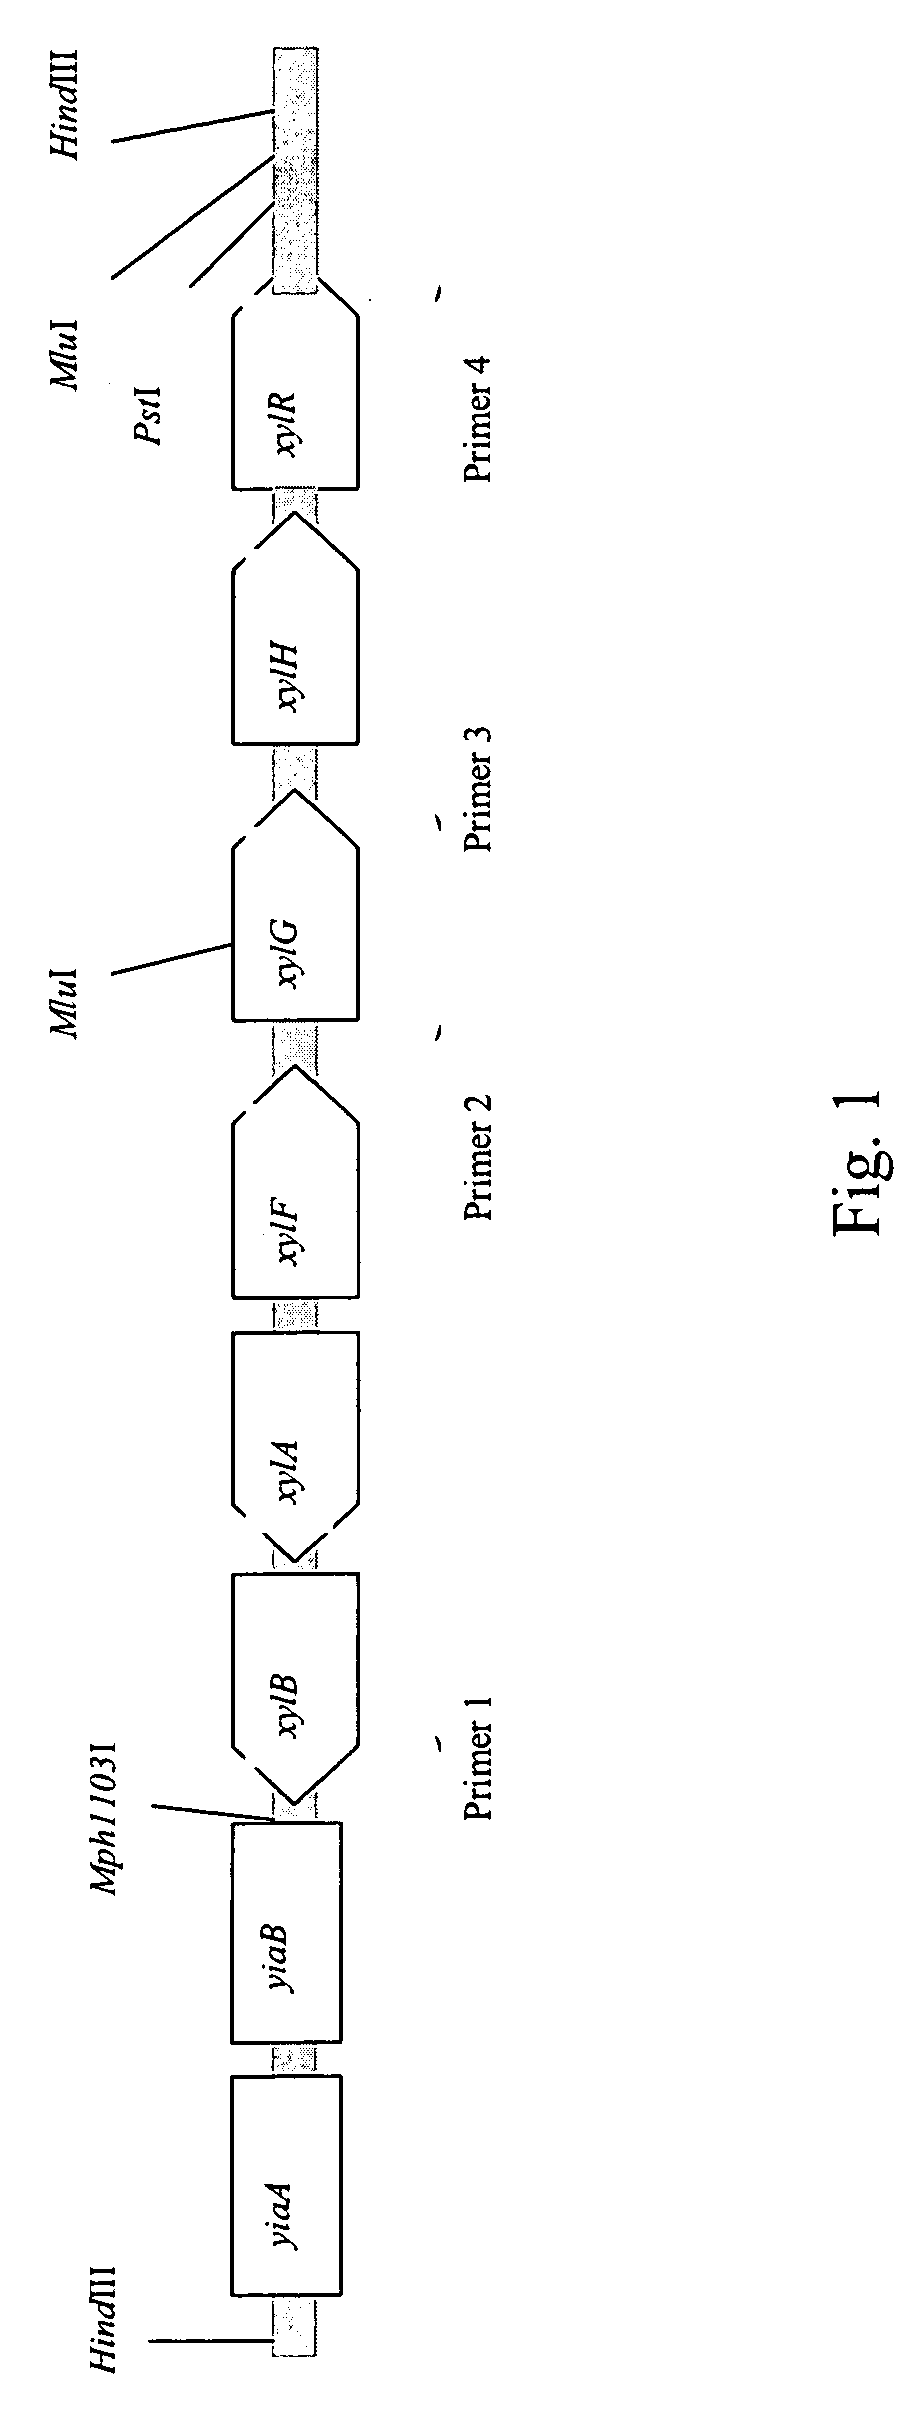 Method for producing l-amino acids by fermentation using bacteria having enhanced expression of xylose utilization genes